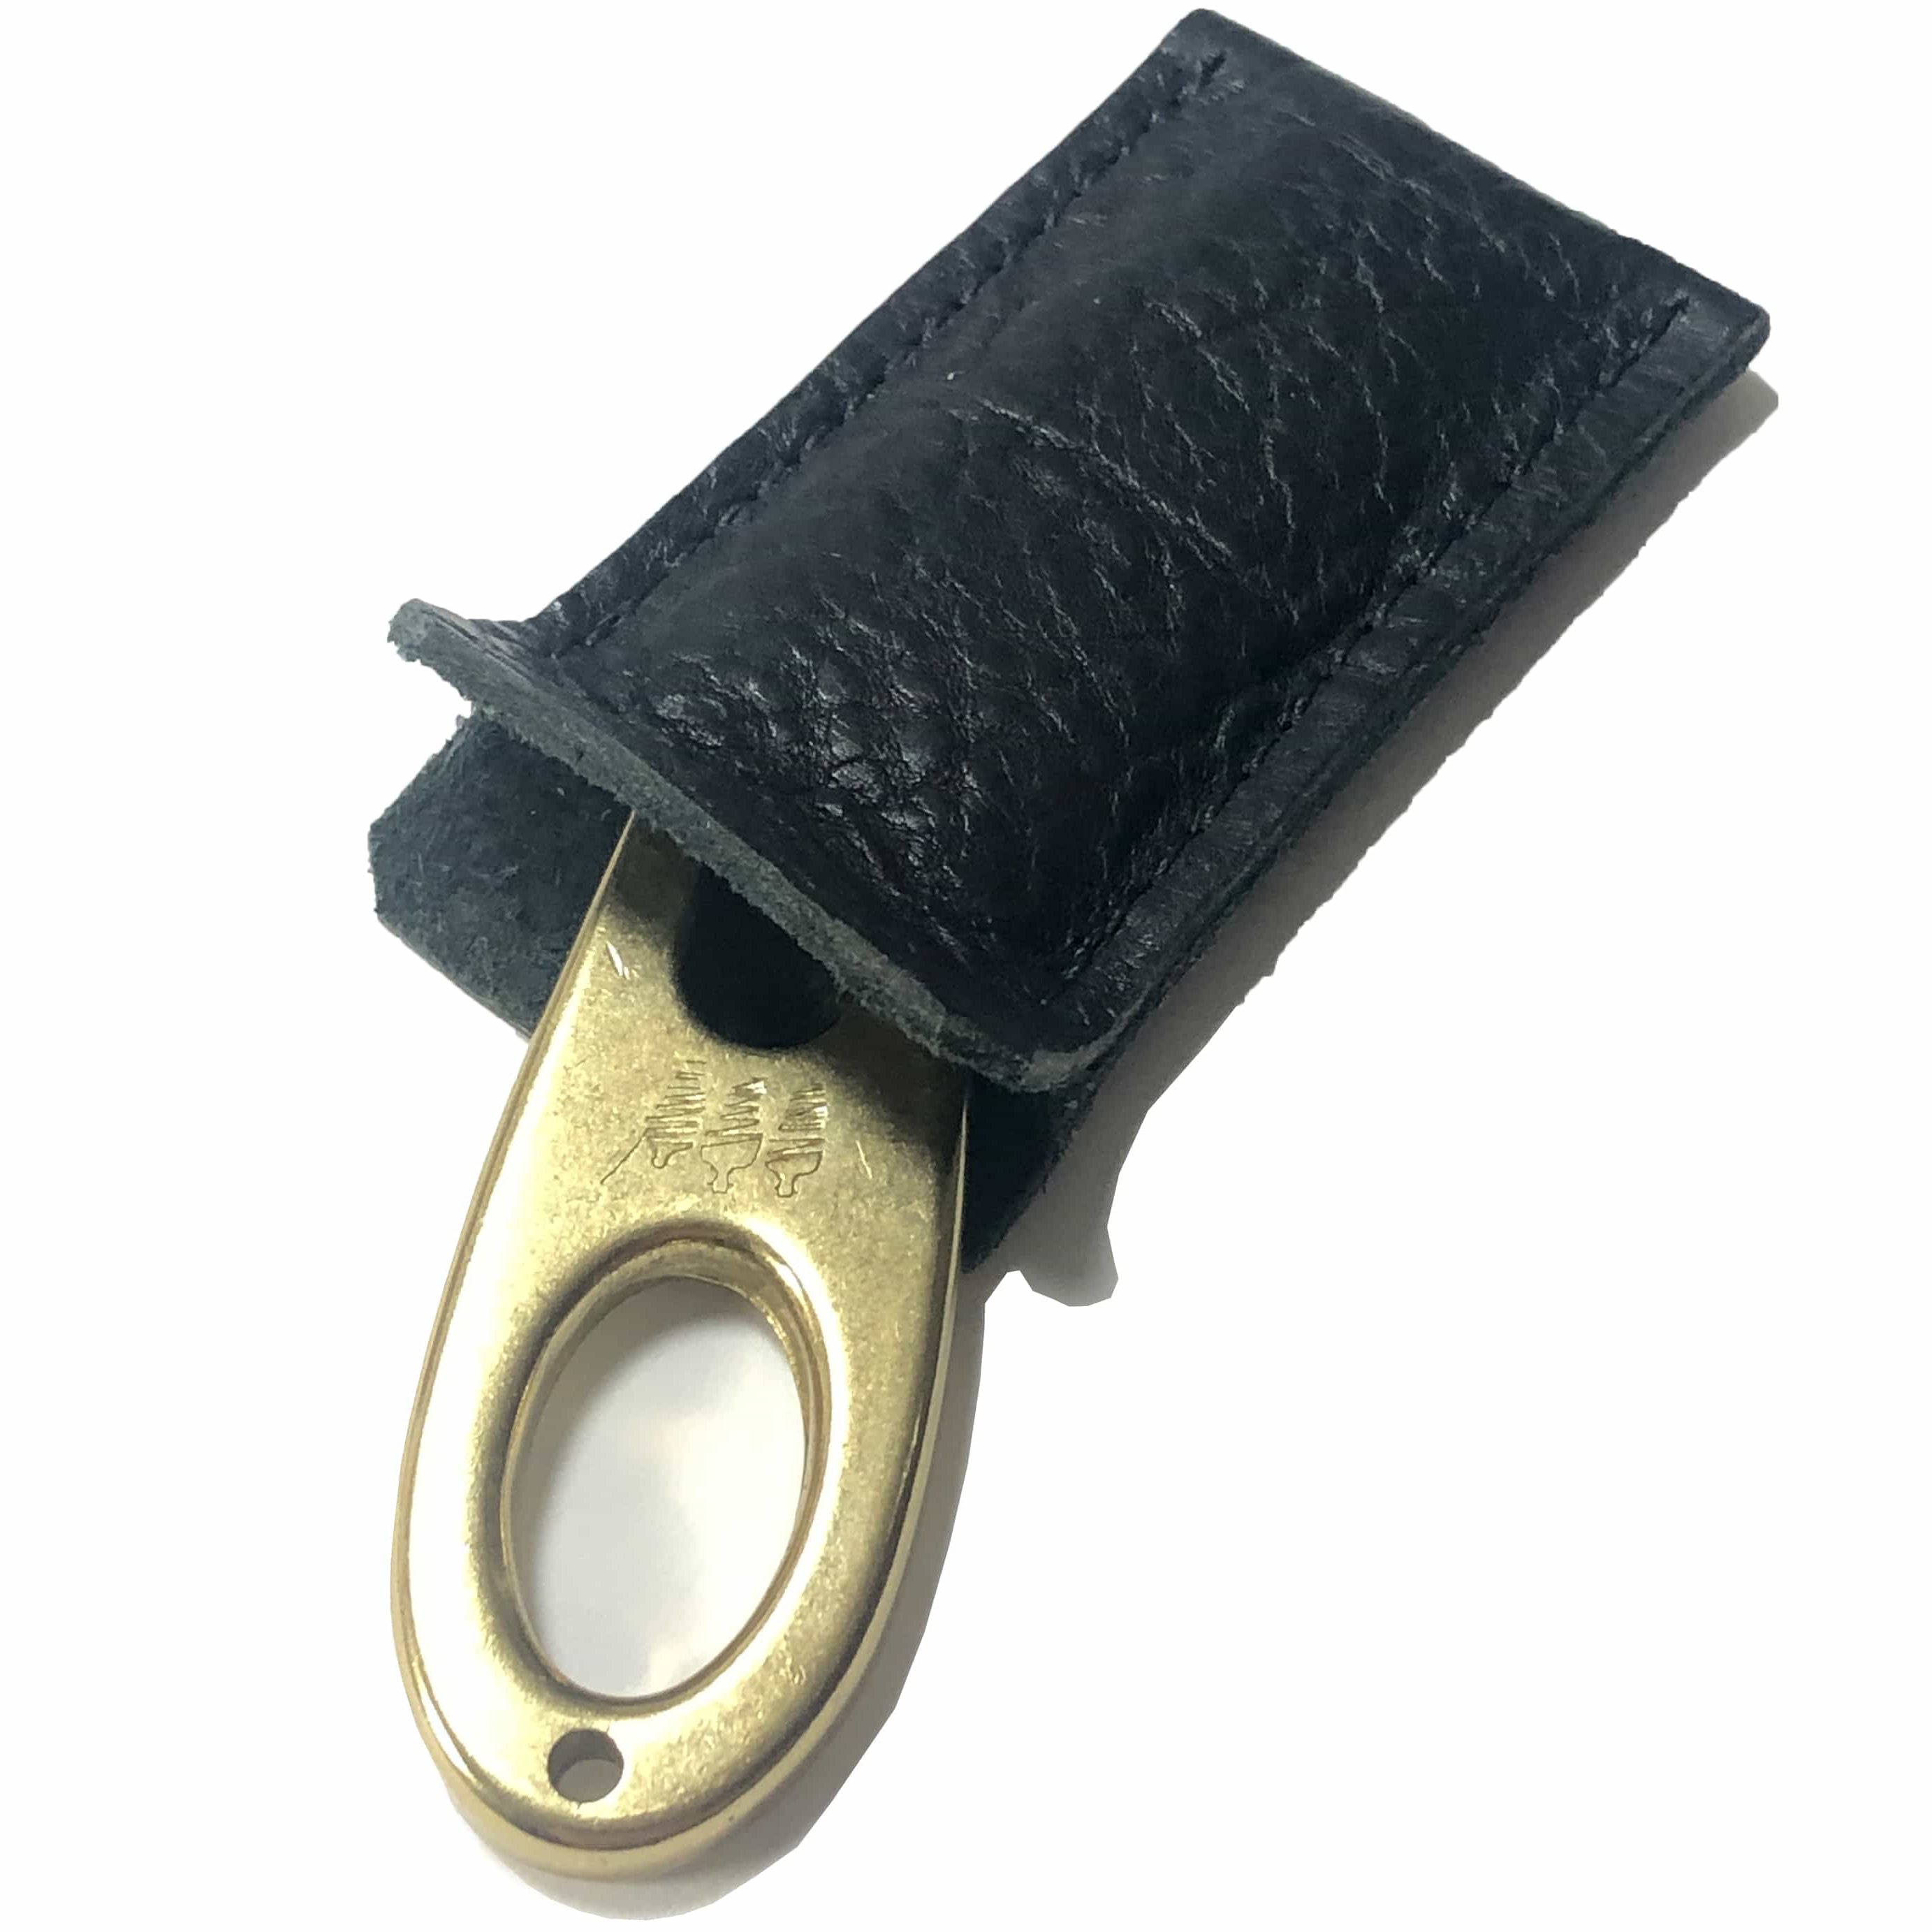 Golf divot tool solid brass with black bison leather sleeve, shown inserted.